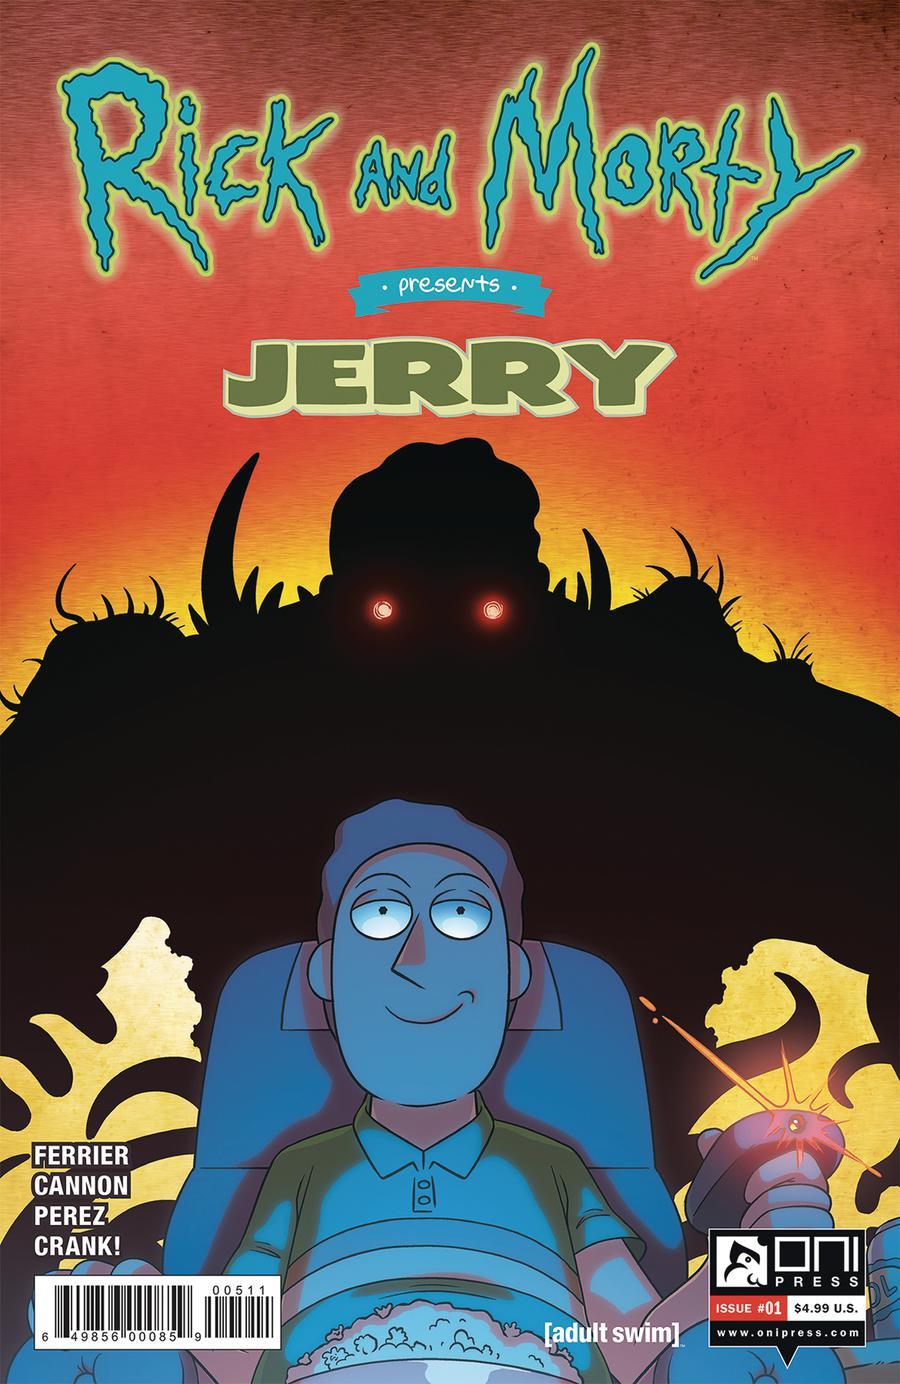 Rick And Morty Presents Jerry Vol. 1 #1